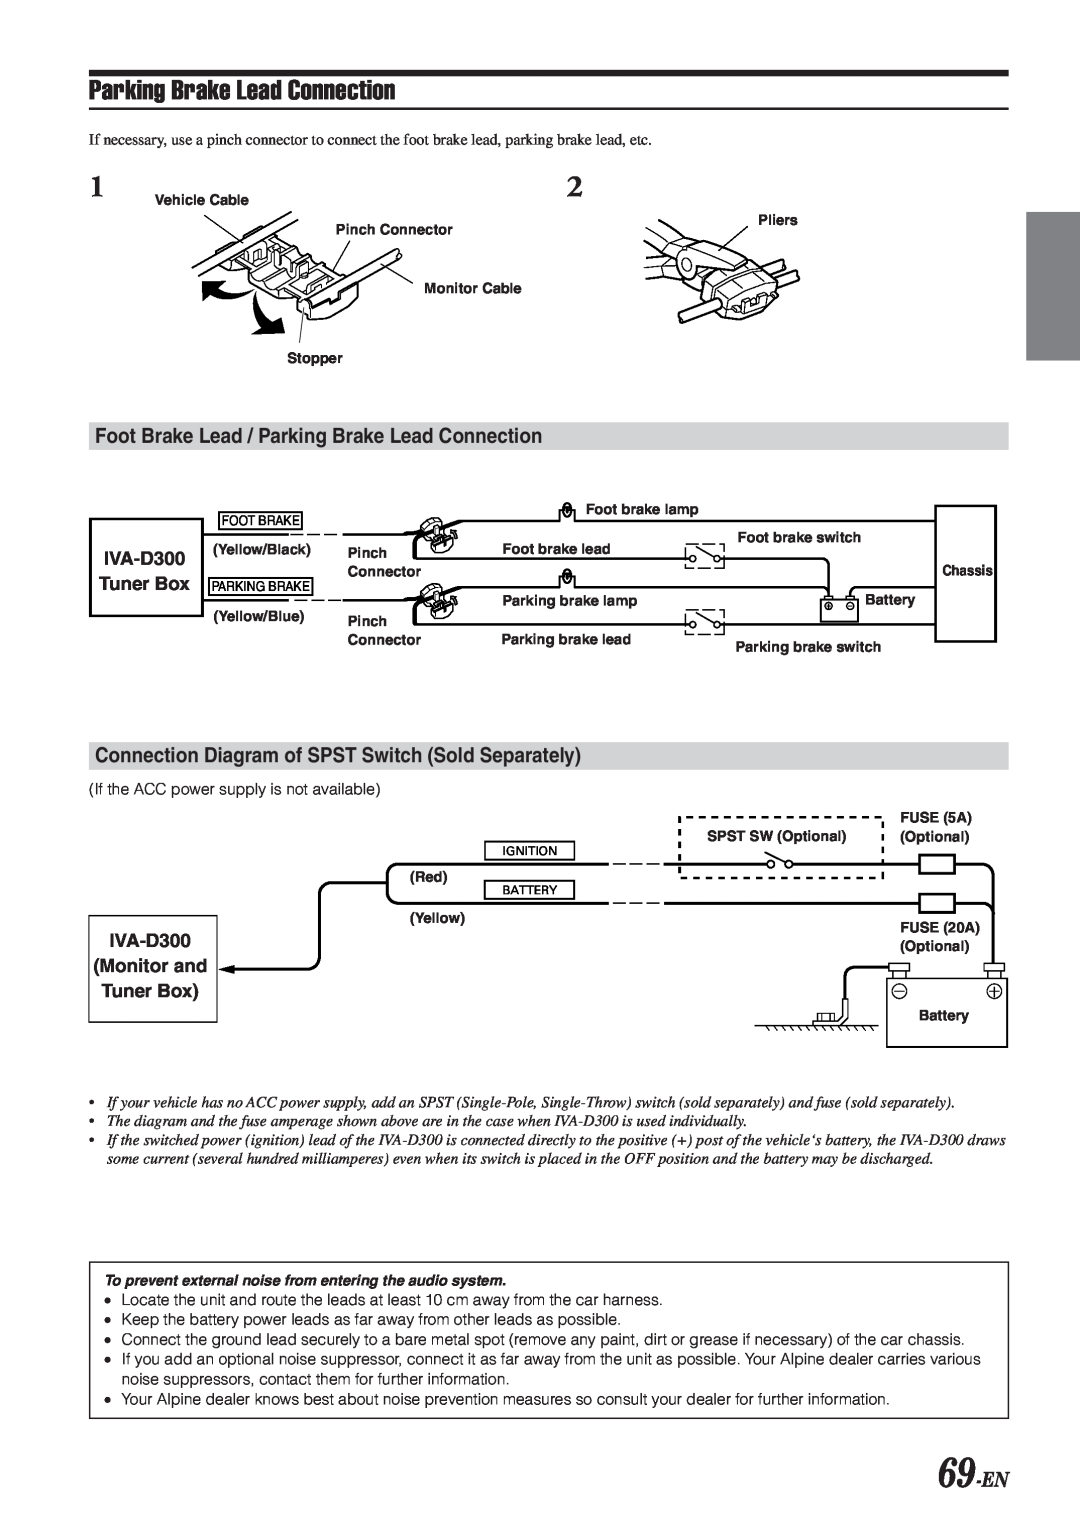 Alpine IVA-D300 Foot Brake Lead / Parking Brake Lead Connection, Connection Diagram of SPST Switch Sold Separately 